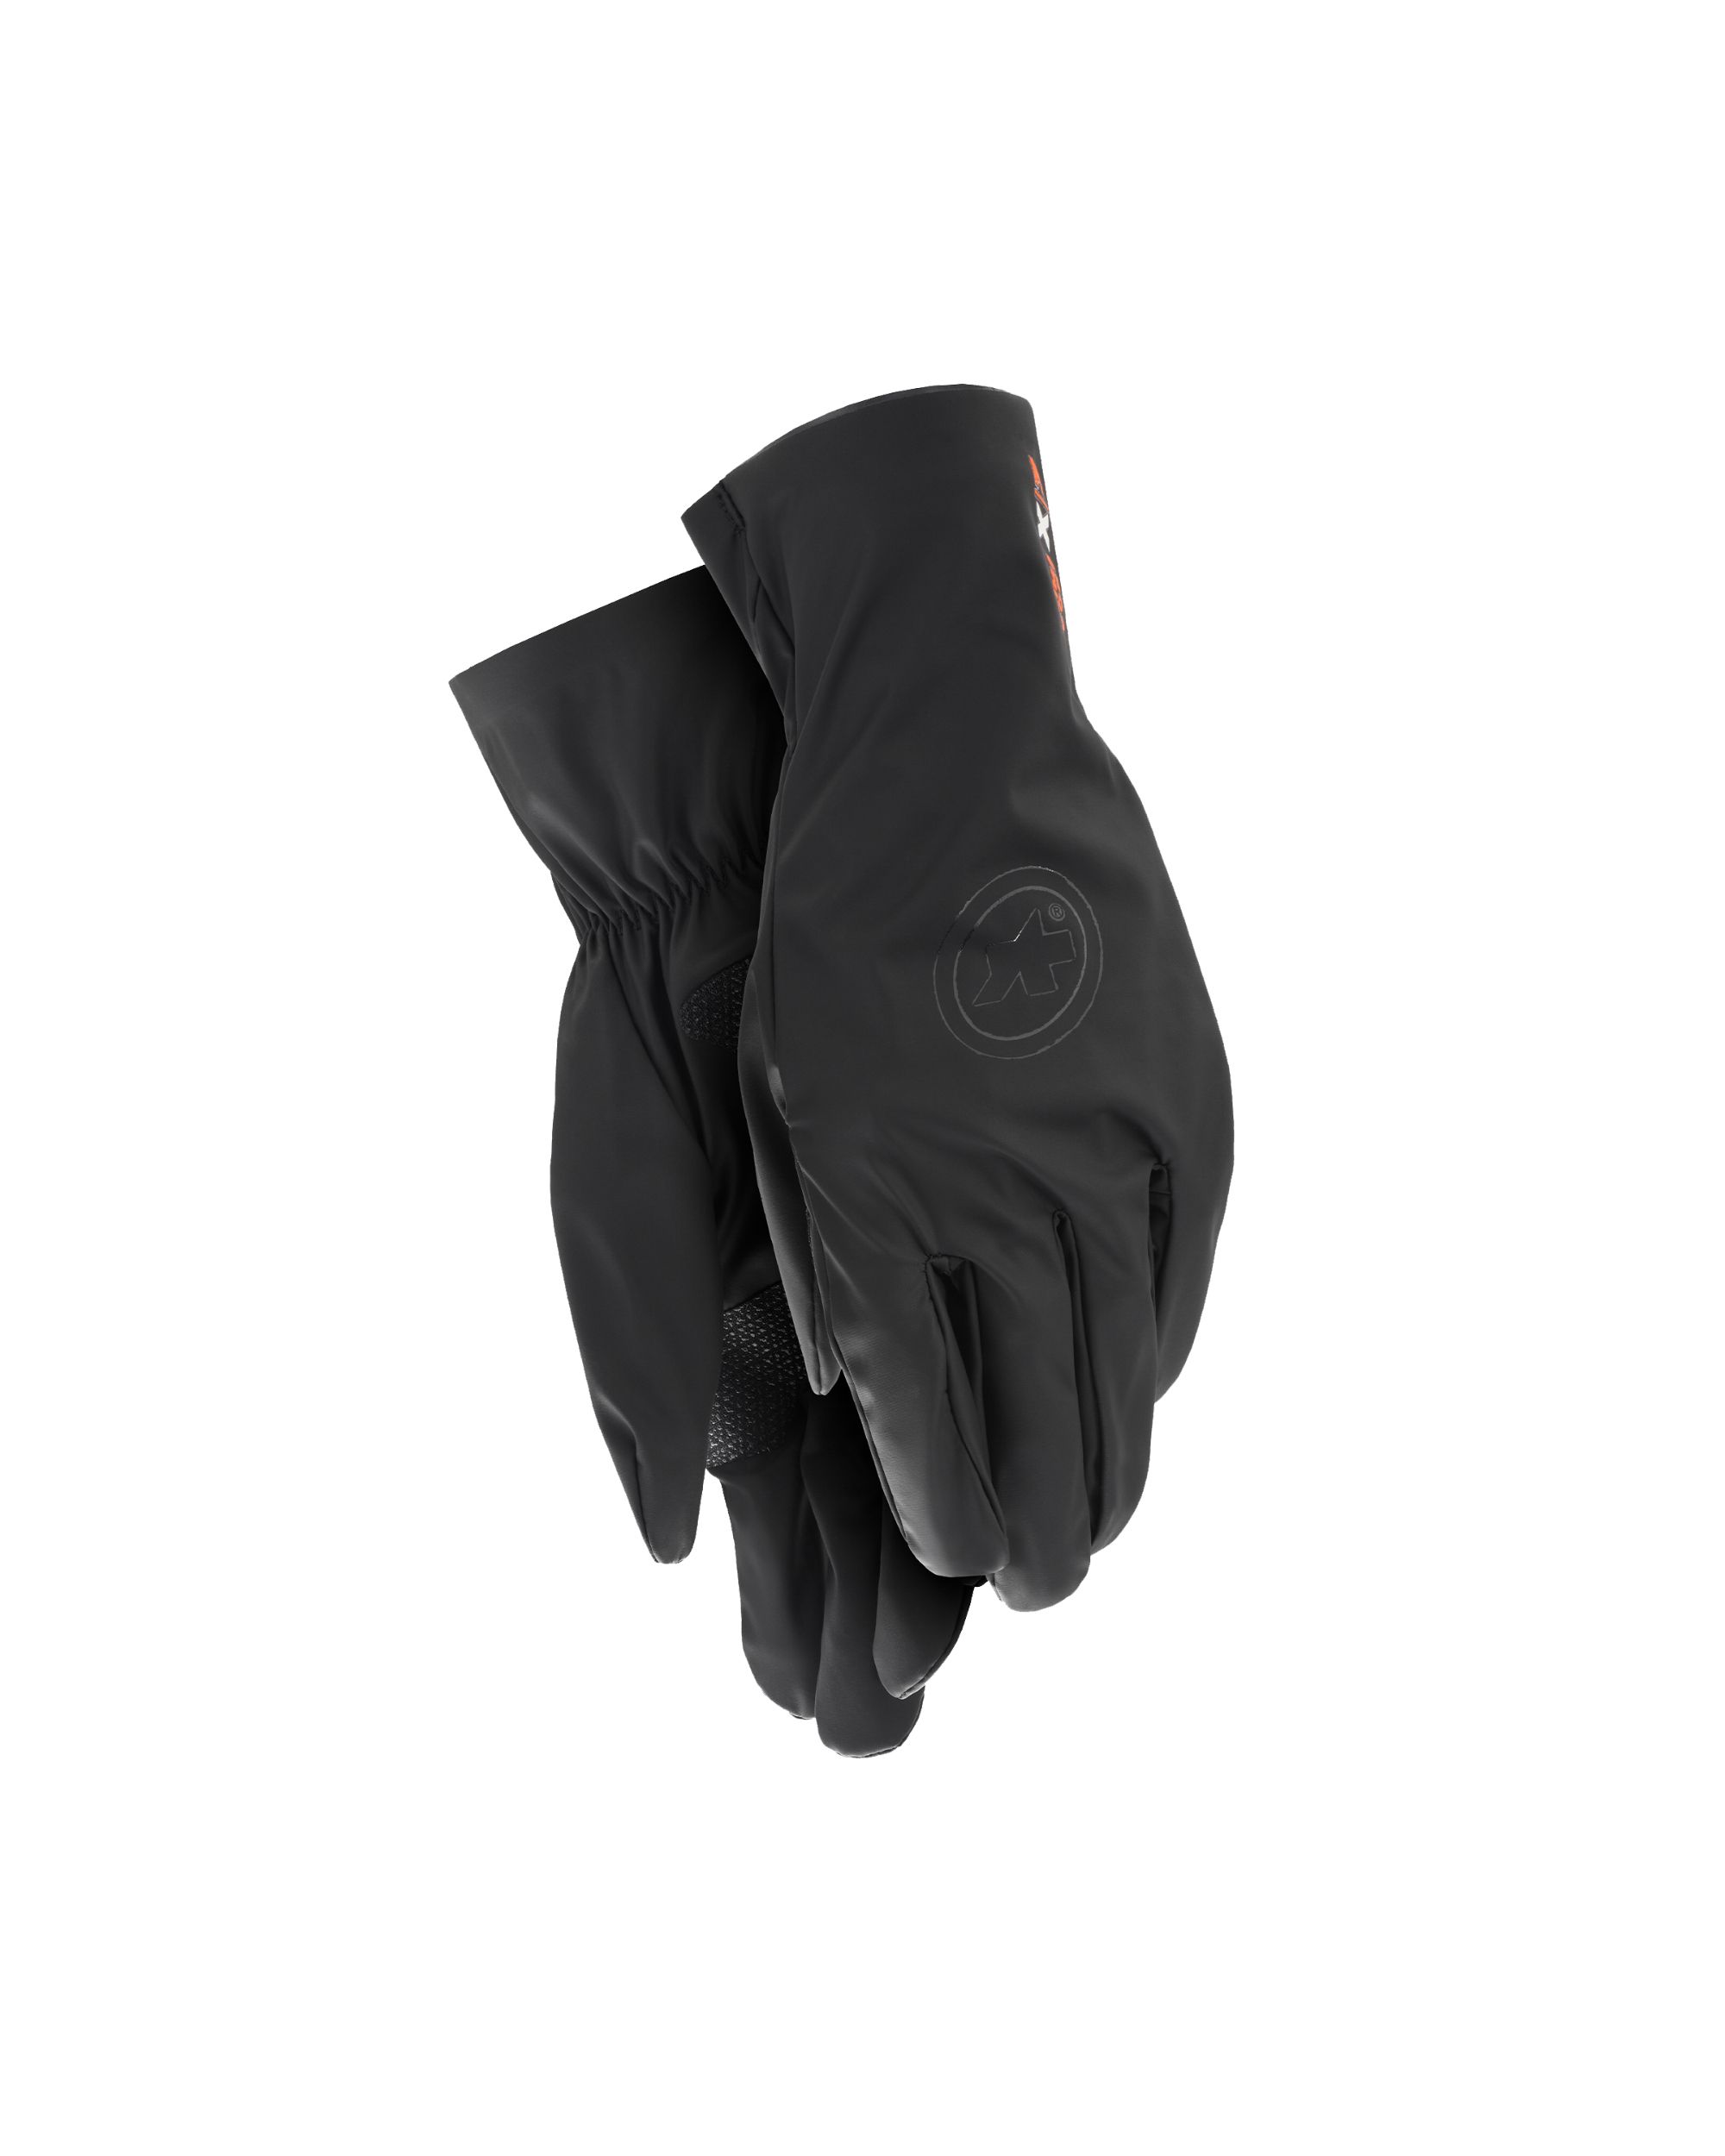 Assos Rsr Thermo Rain Shell Gloves - £65 | Gloves - Waterproof | Cyclestore